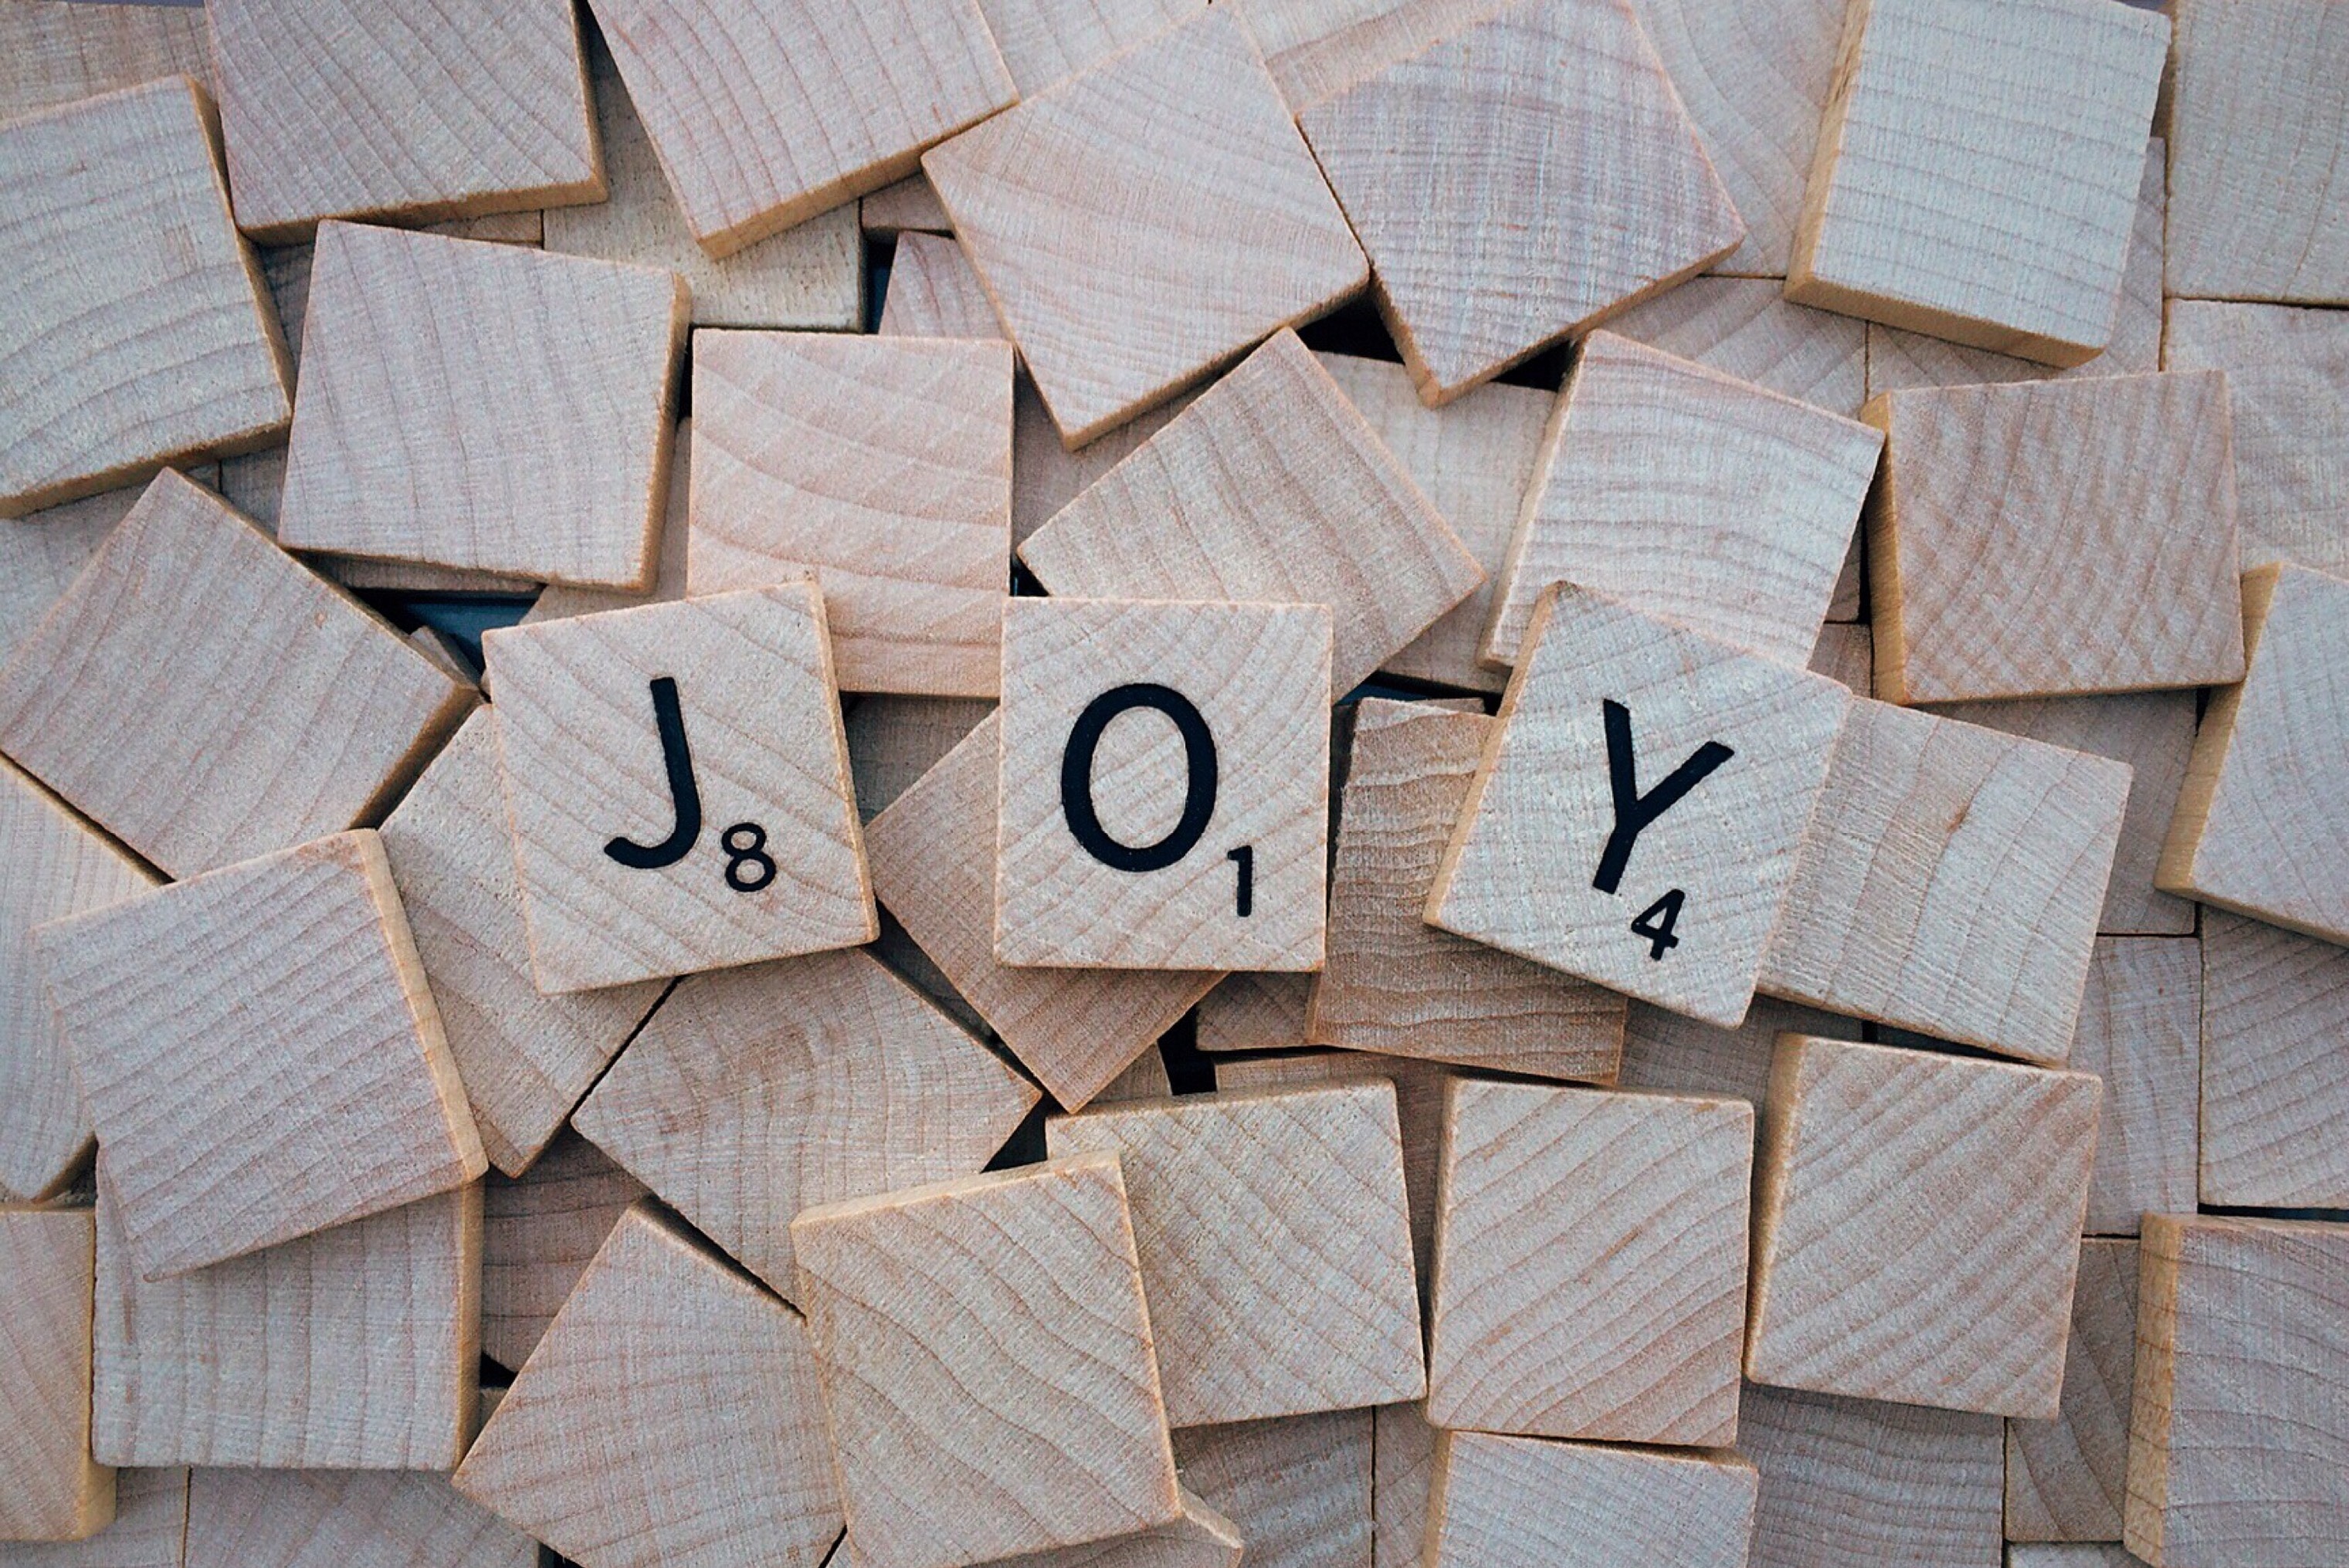 Scrabble: Joy, Motivational word spelled out in wooden game tiles, Mind games. 3050x2040 HD Wallpaper.